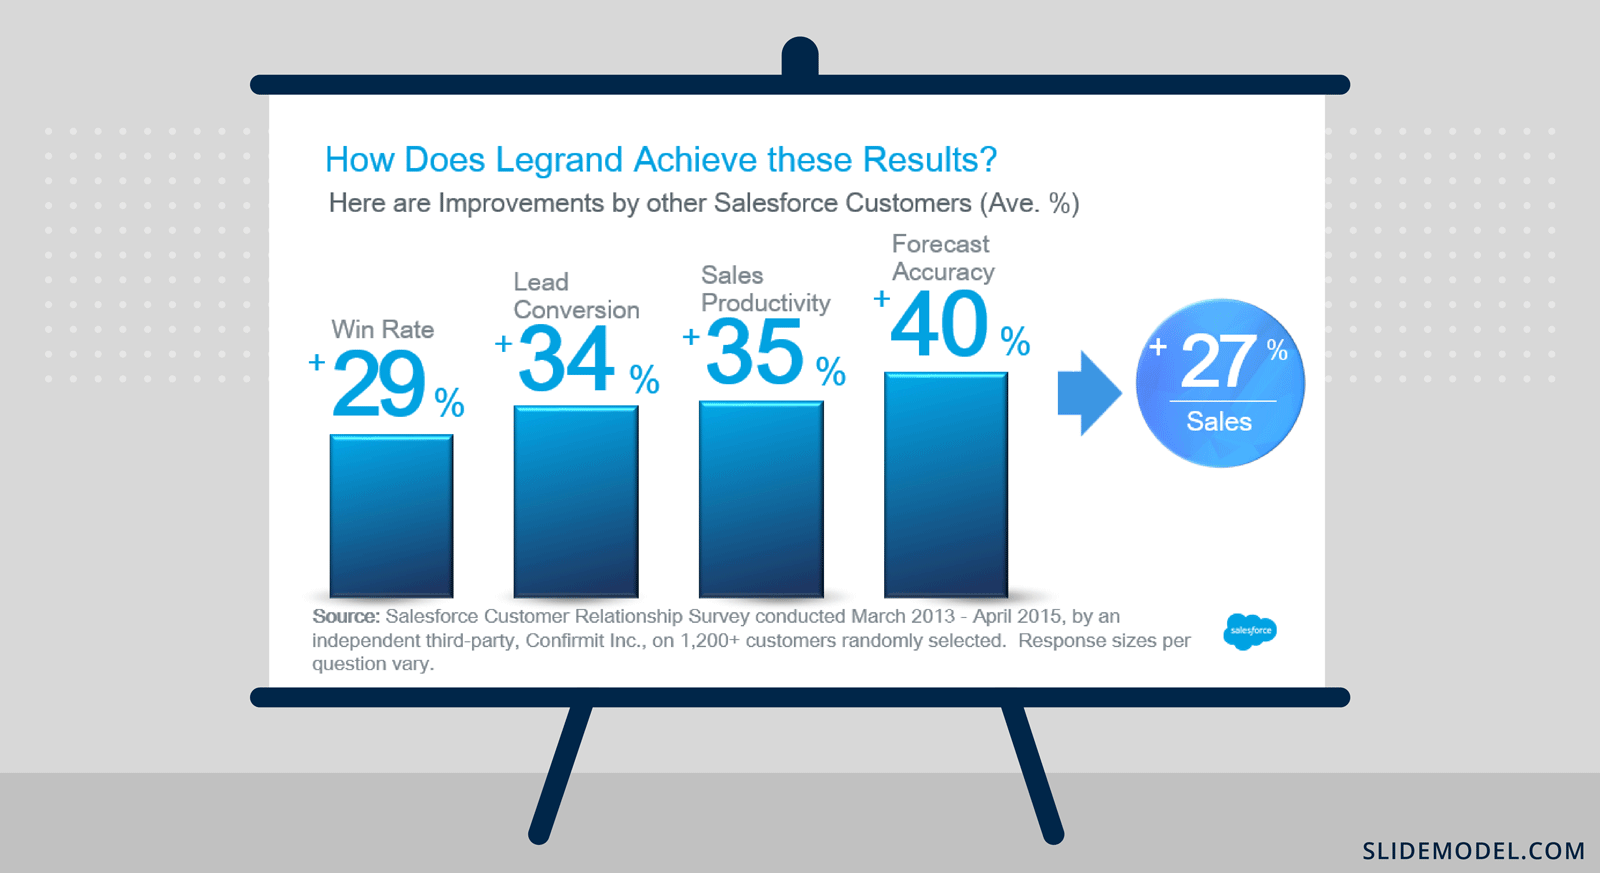 Example of Data in a Sales Pitch Presentation by Salesforce - Showing how does Legrand achieve these results and a bar chart